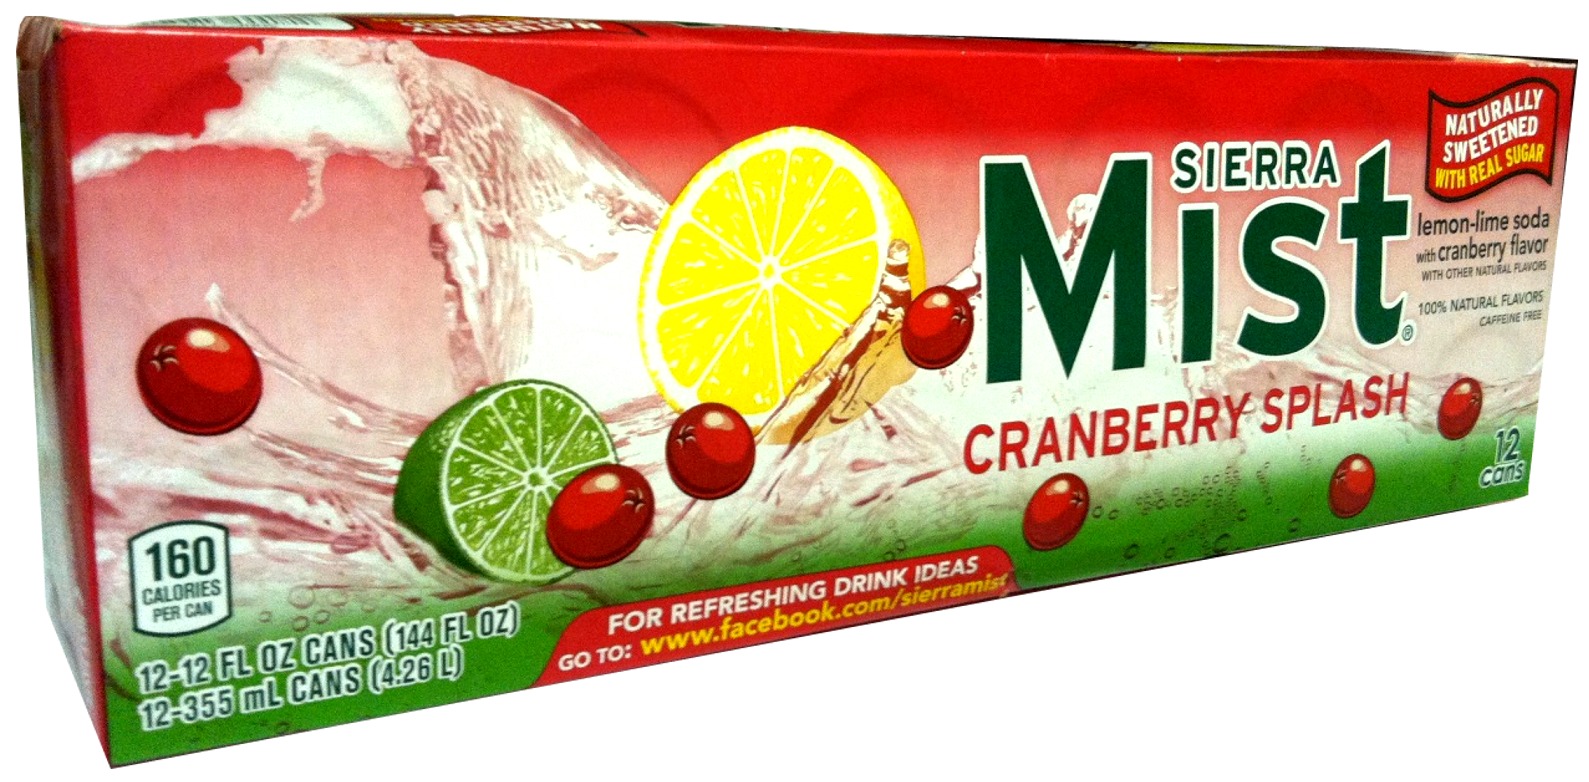 Things that disappeared without a trace - natural foods - 160 Calories Per Can 1212 Fl Oz Cans 144 Fl Oz 12355 mL Cans 4.26 L Sierra Mist Cranberry Splash 00 For Refreshing Drink Ideas Go To Naturally Sweetened With Real Sugar lemonlime soda with cranberr